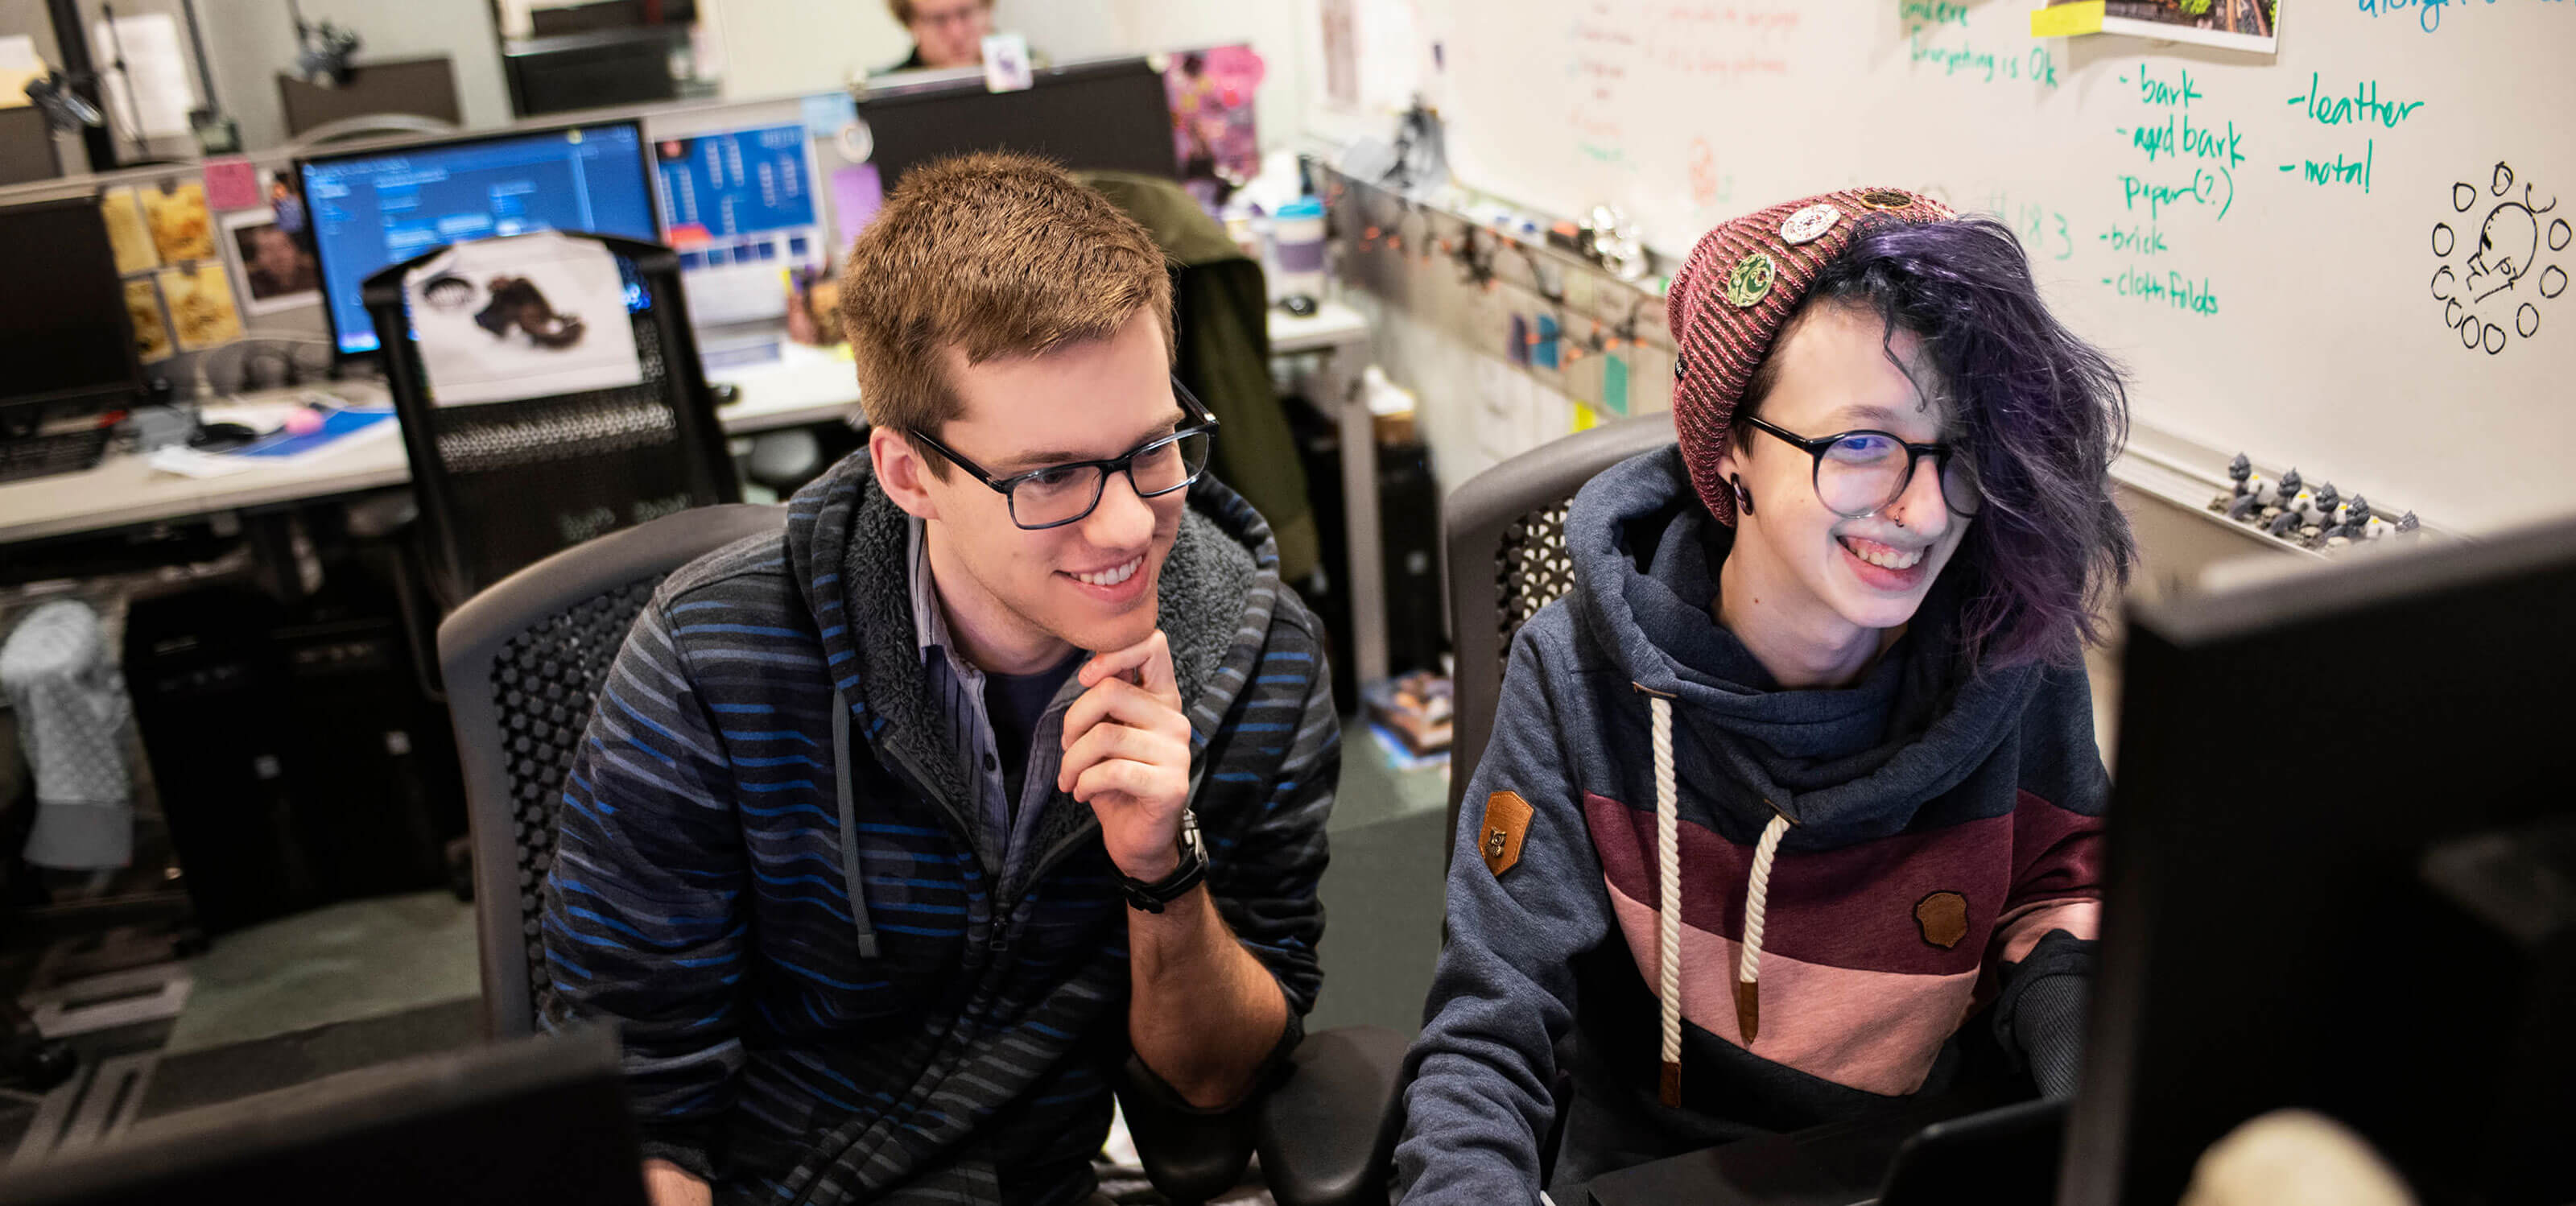 Two students working together in a computer lab looking and smiling at a computer monitor.